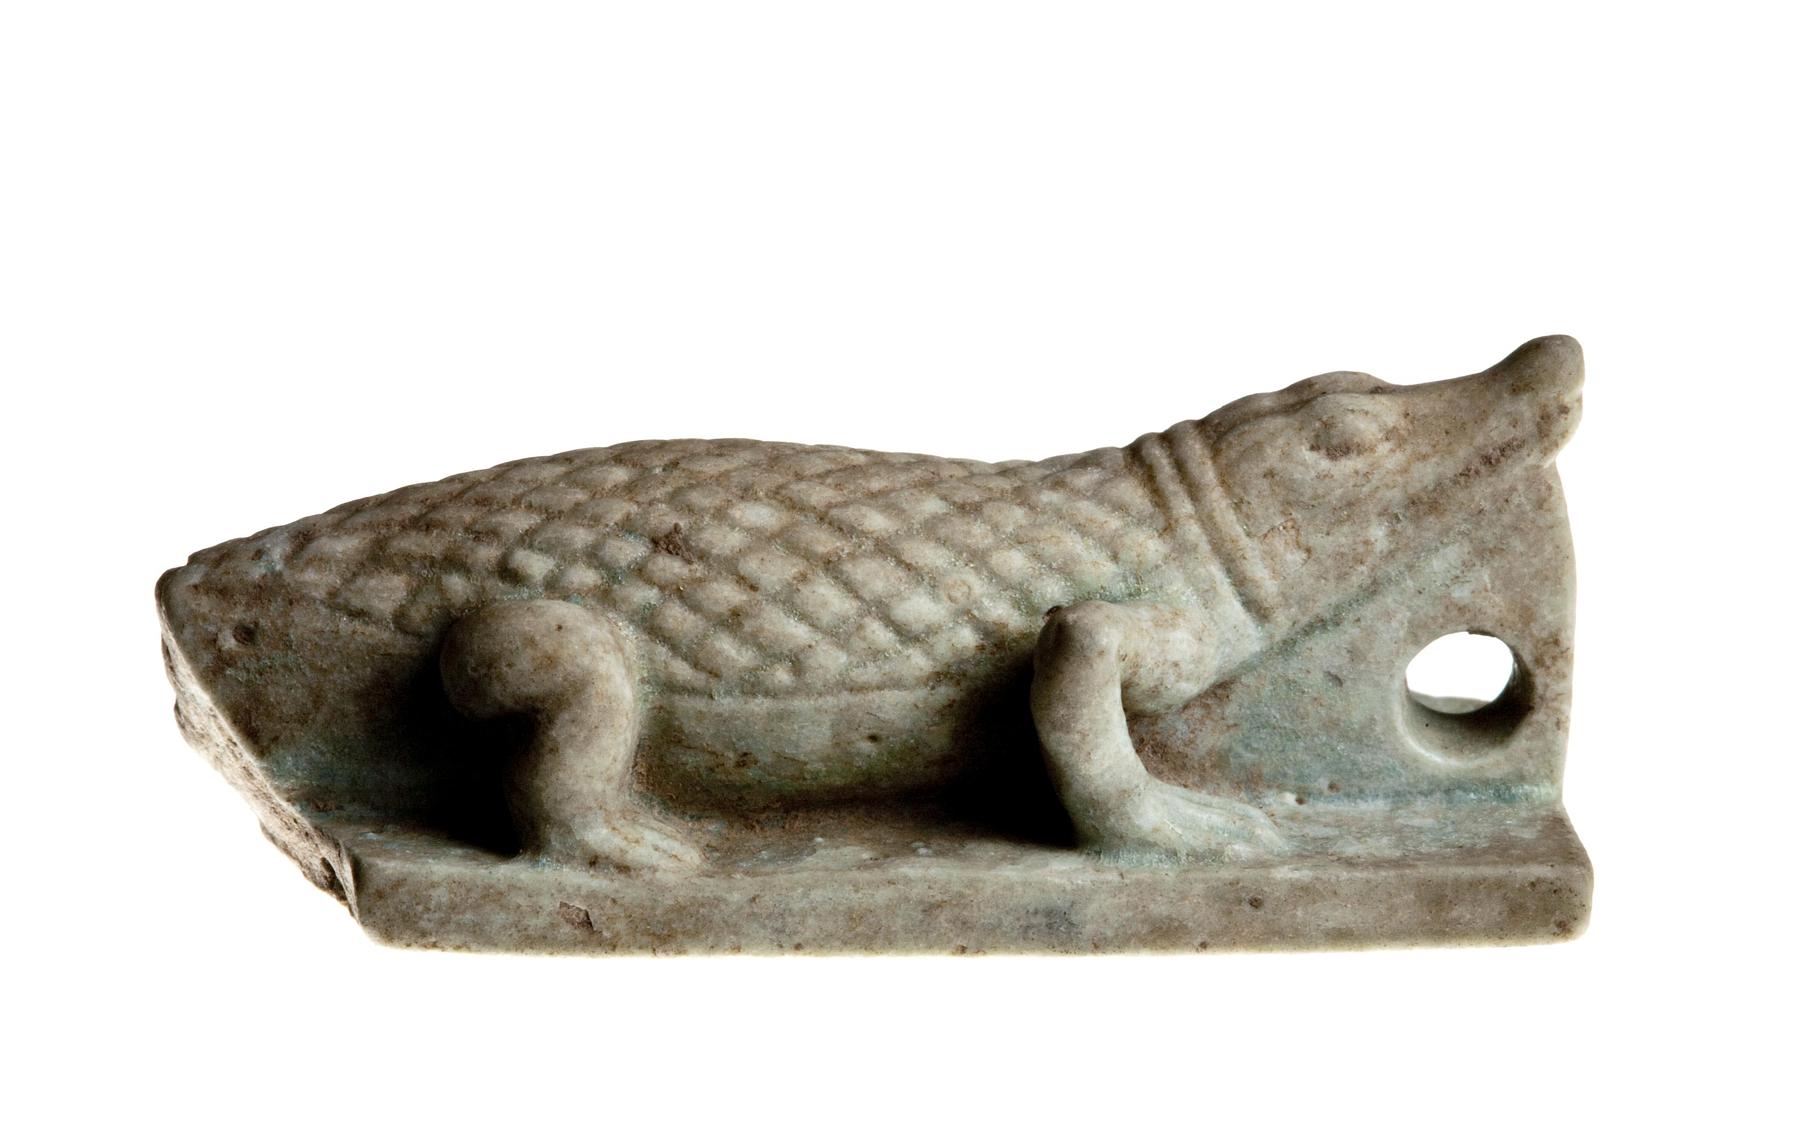 Amulet in the shape of a crocodile, H116